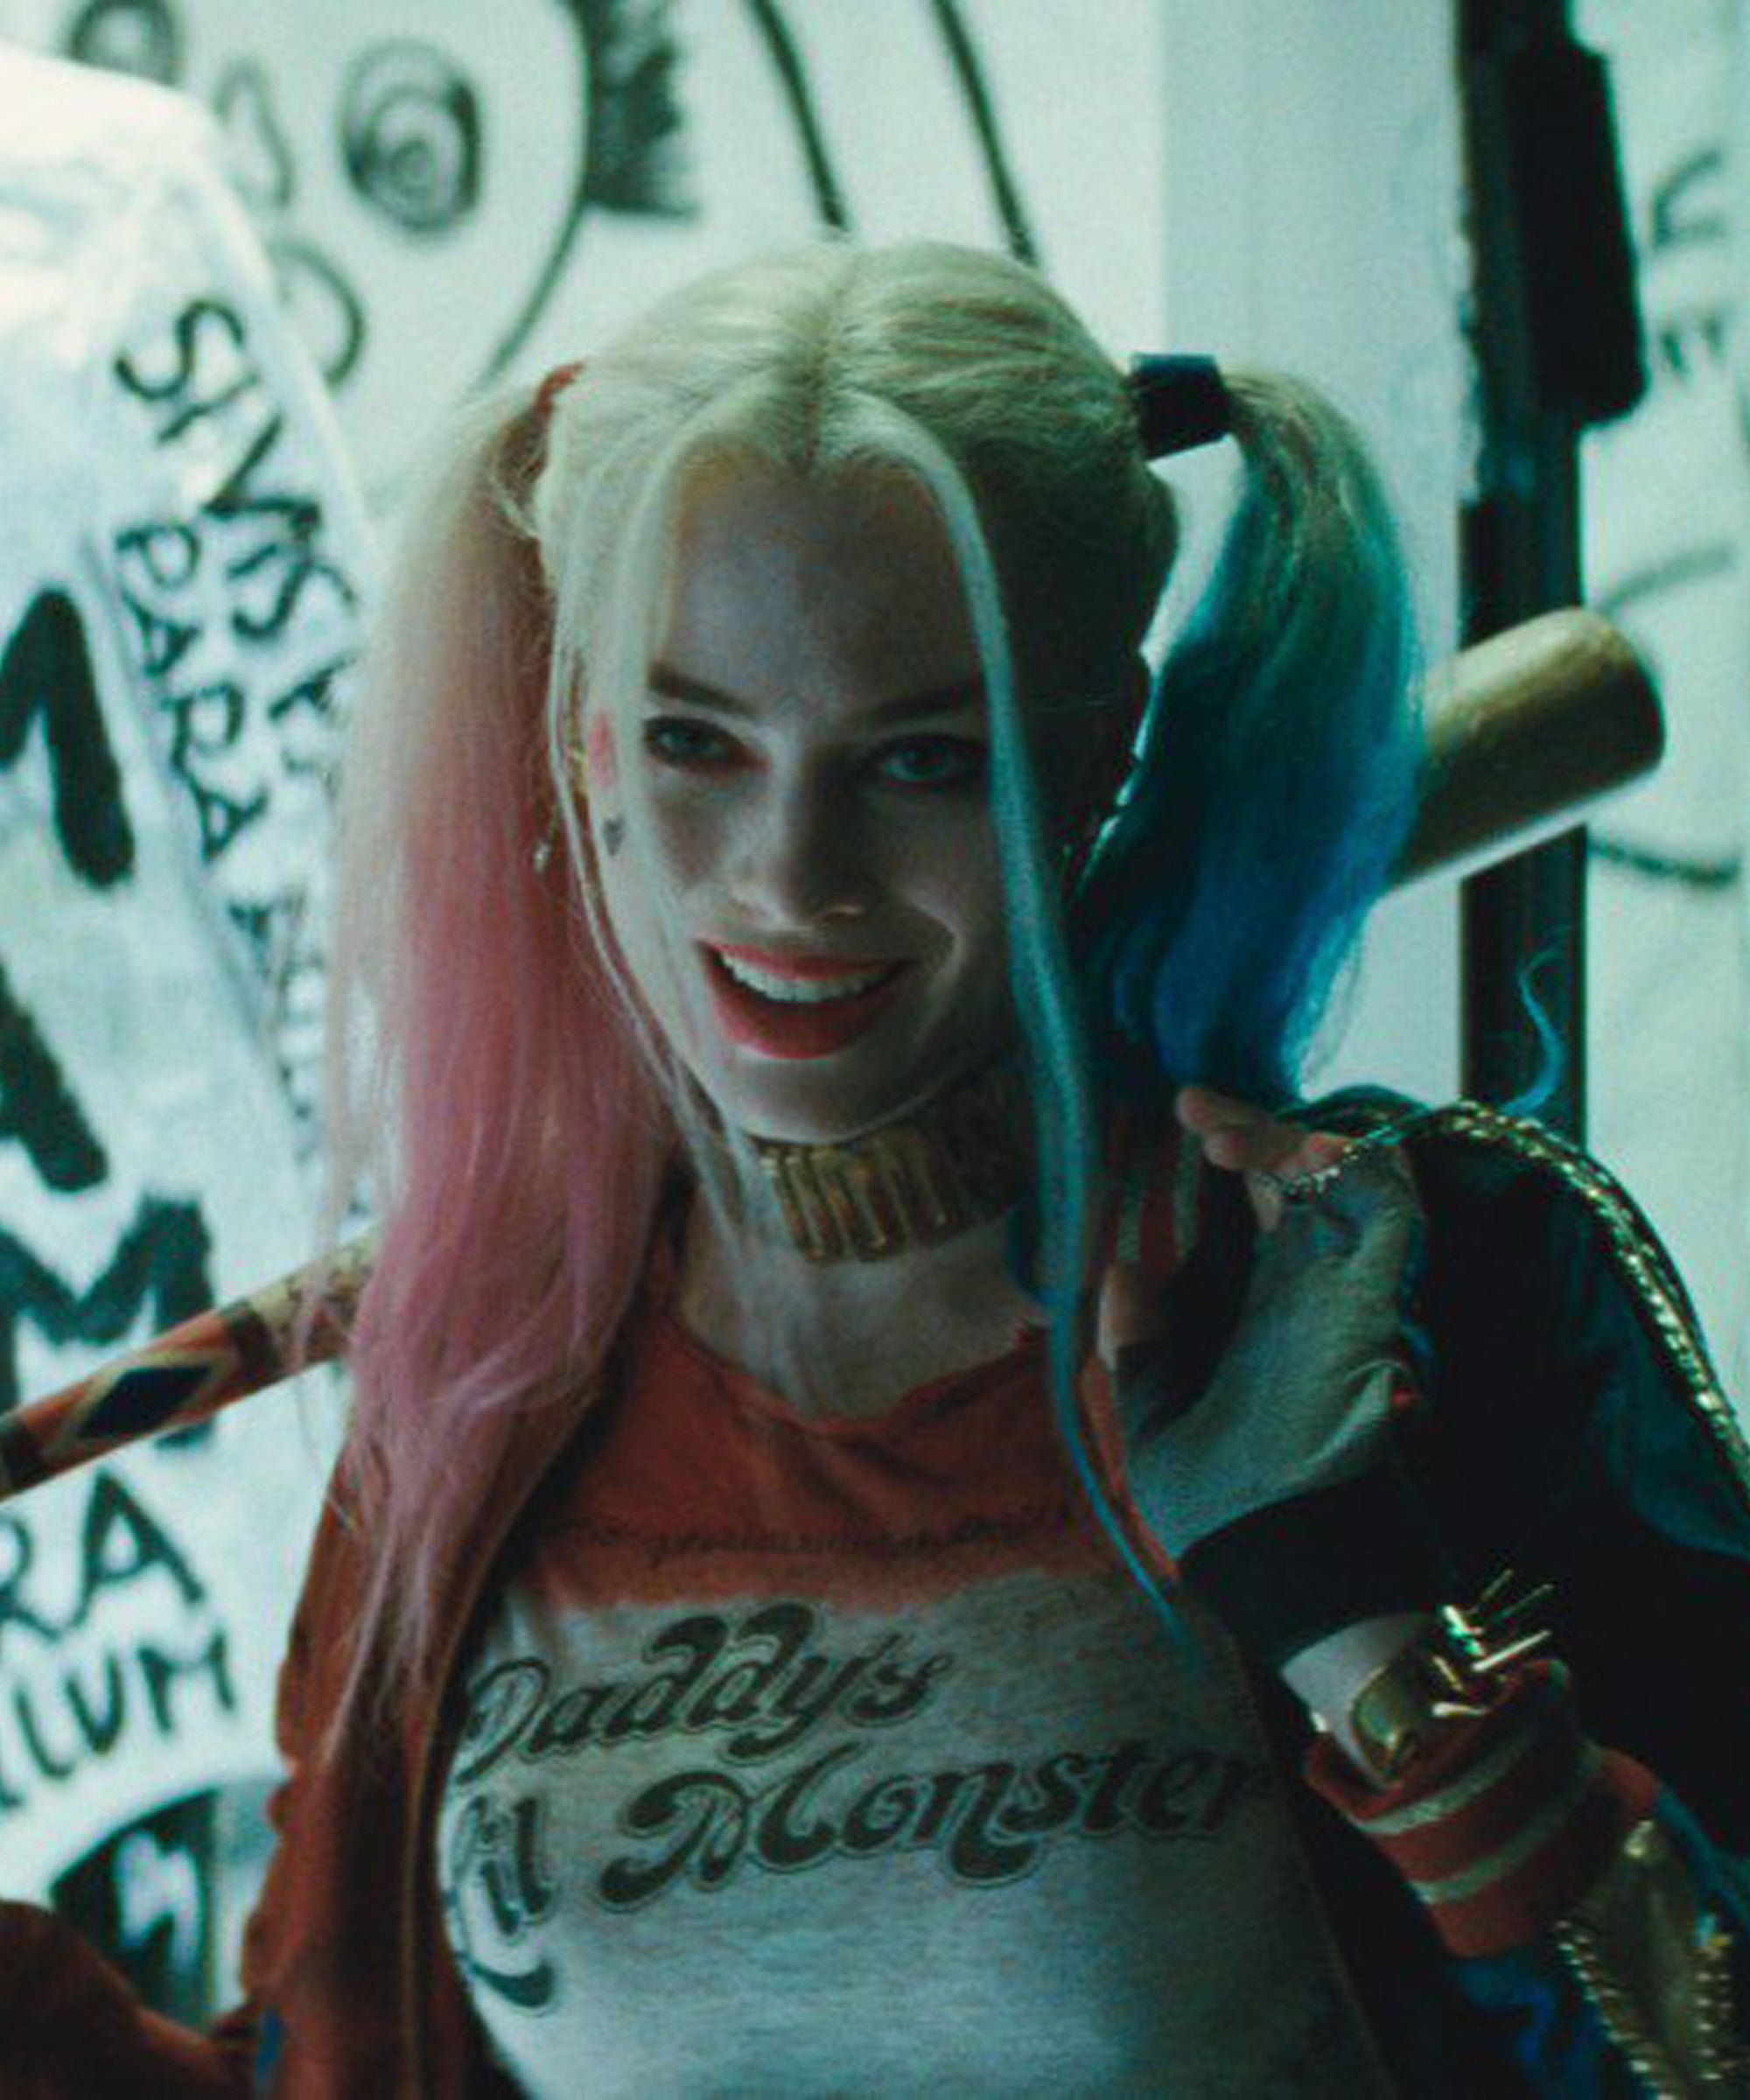 Harley Quinn: Birds of Prey: What Went Wrong, and What Went Right